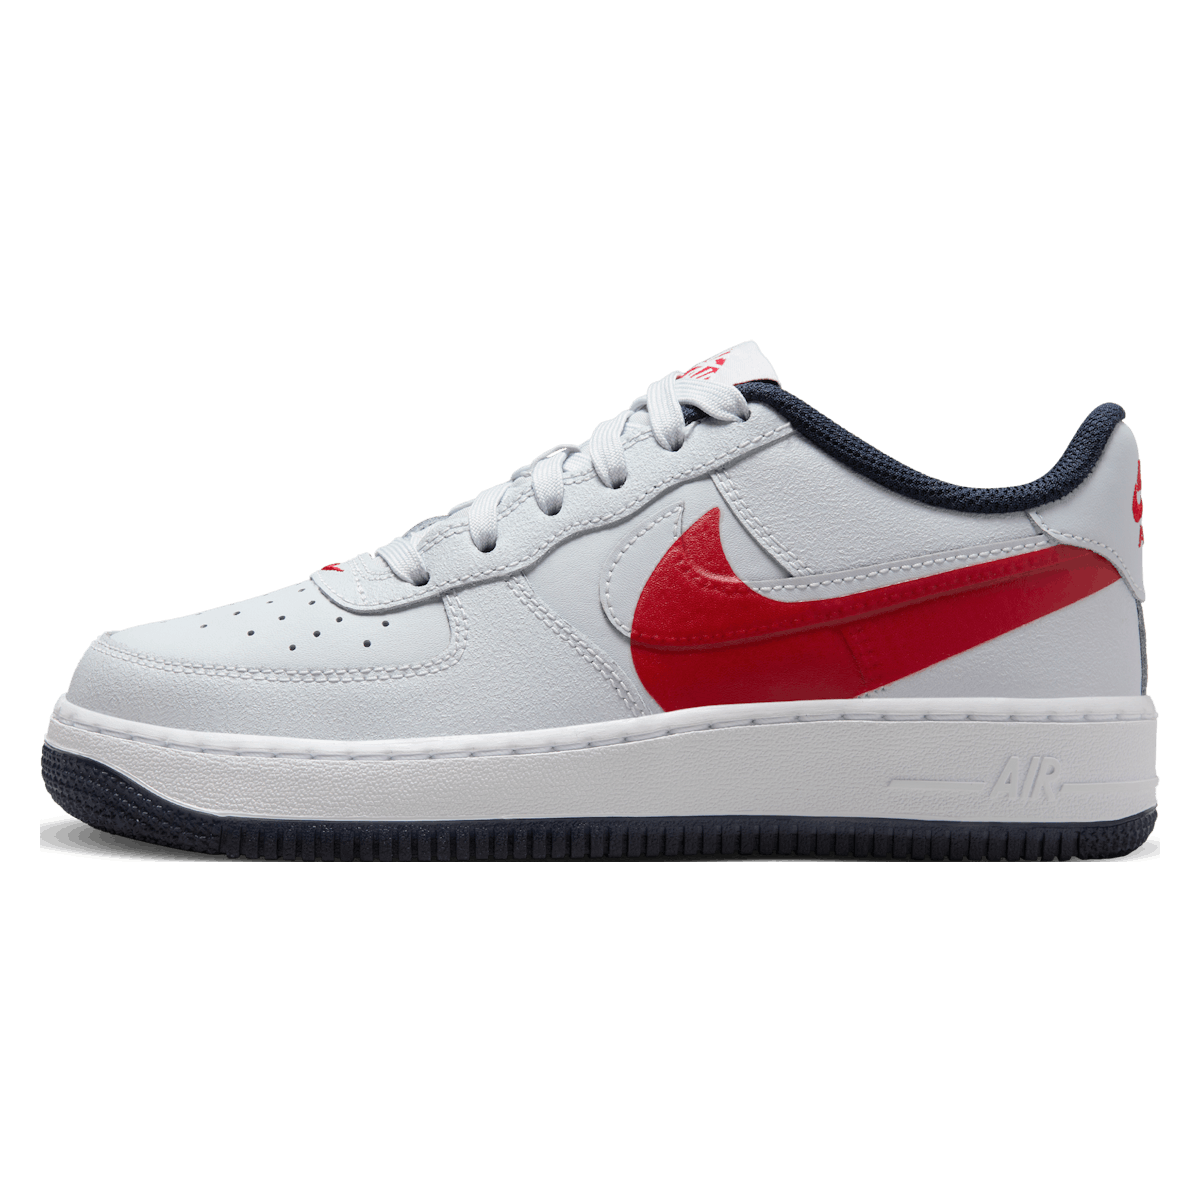 Nike Air Force 1 LV8 4 GS "Pure Platinum / University Red"